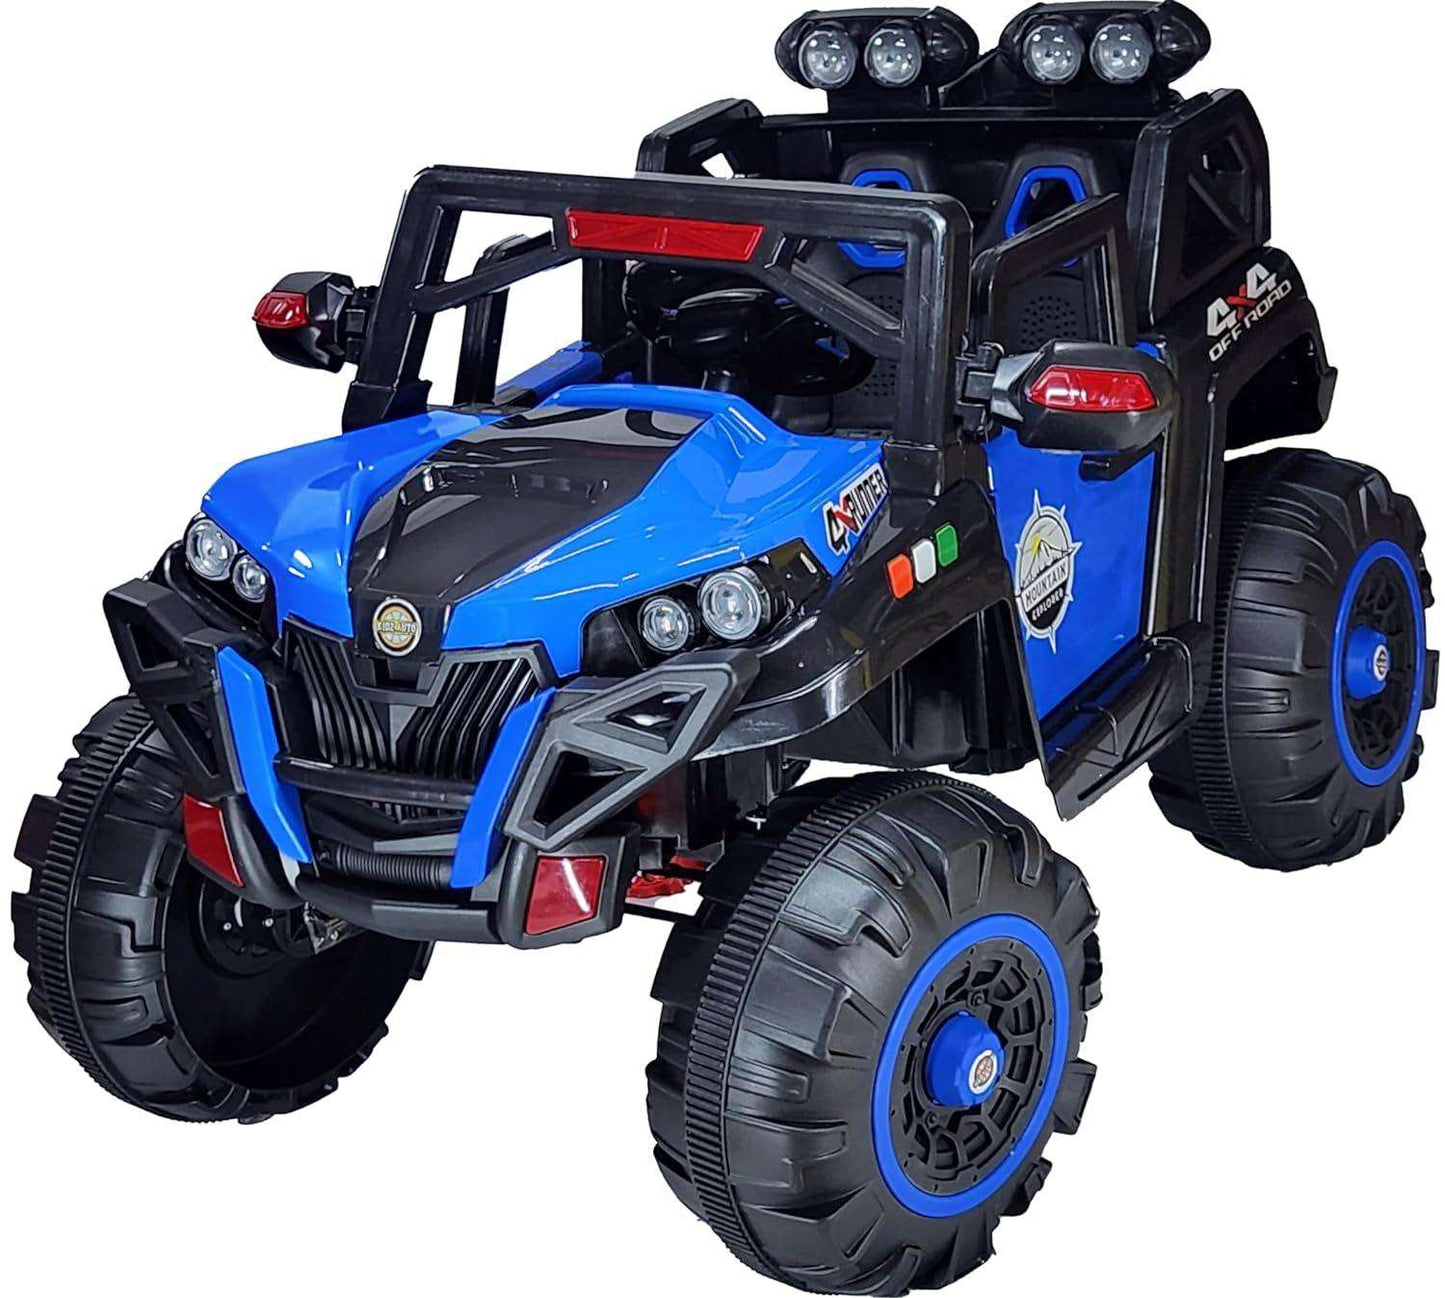 PATOYS | Battery Operated 4x4 Jeep 2188 2 speed 4 motors 4 wheel shock absorbers ride on jeep for 8 years kids Ride on Jeep PATOYS